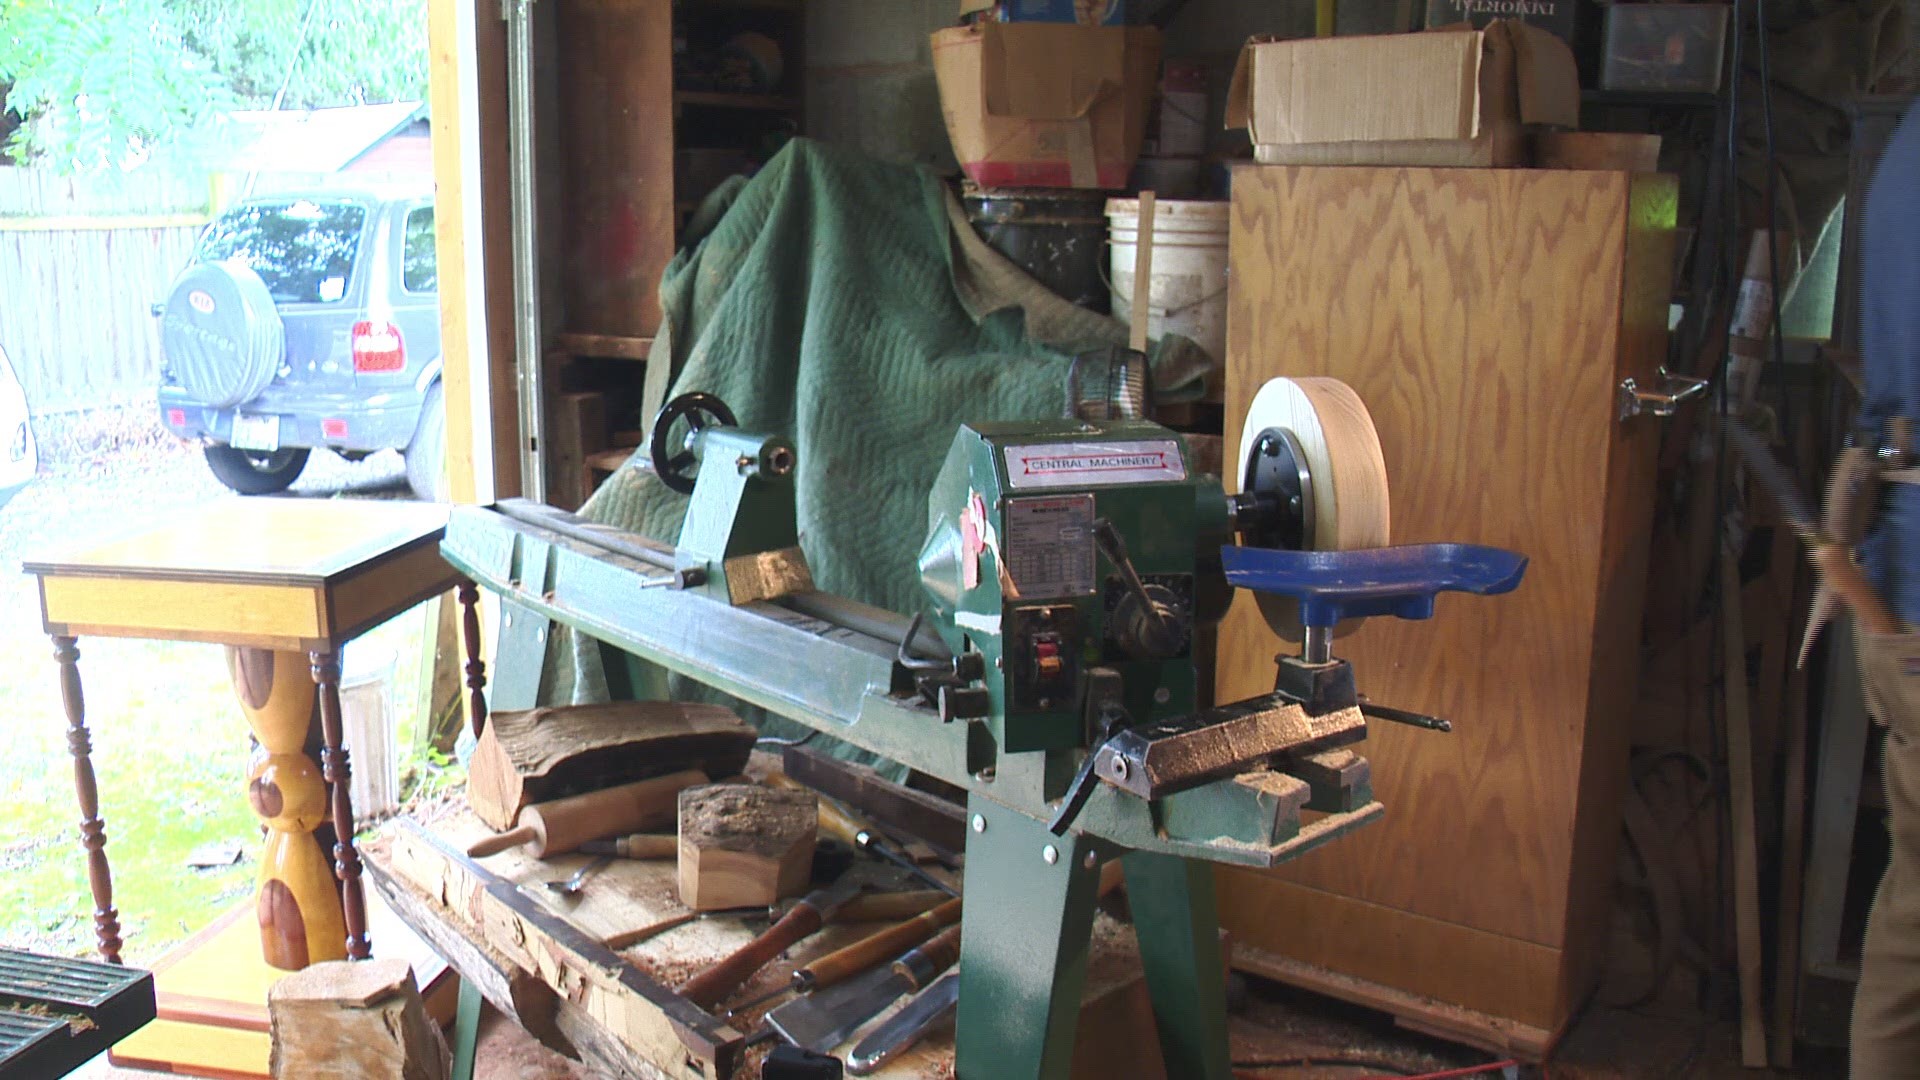 John Furniss picked up the art of fine woodworking at the age of 23